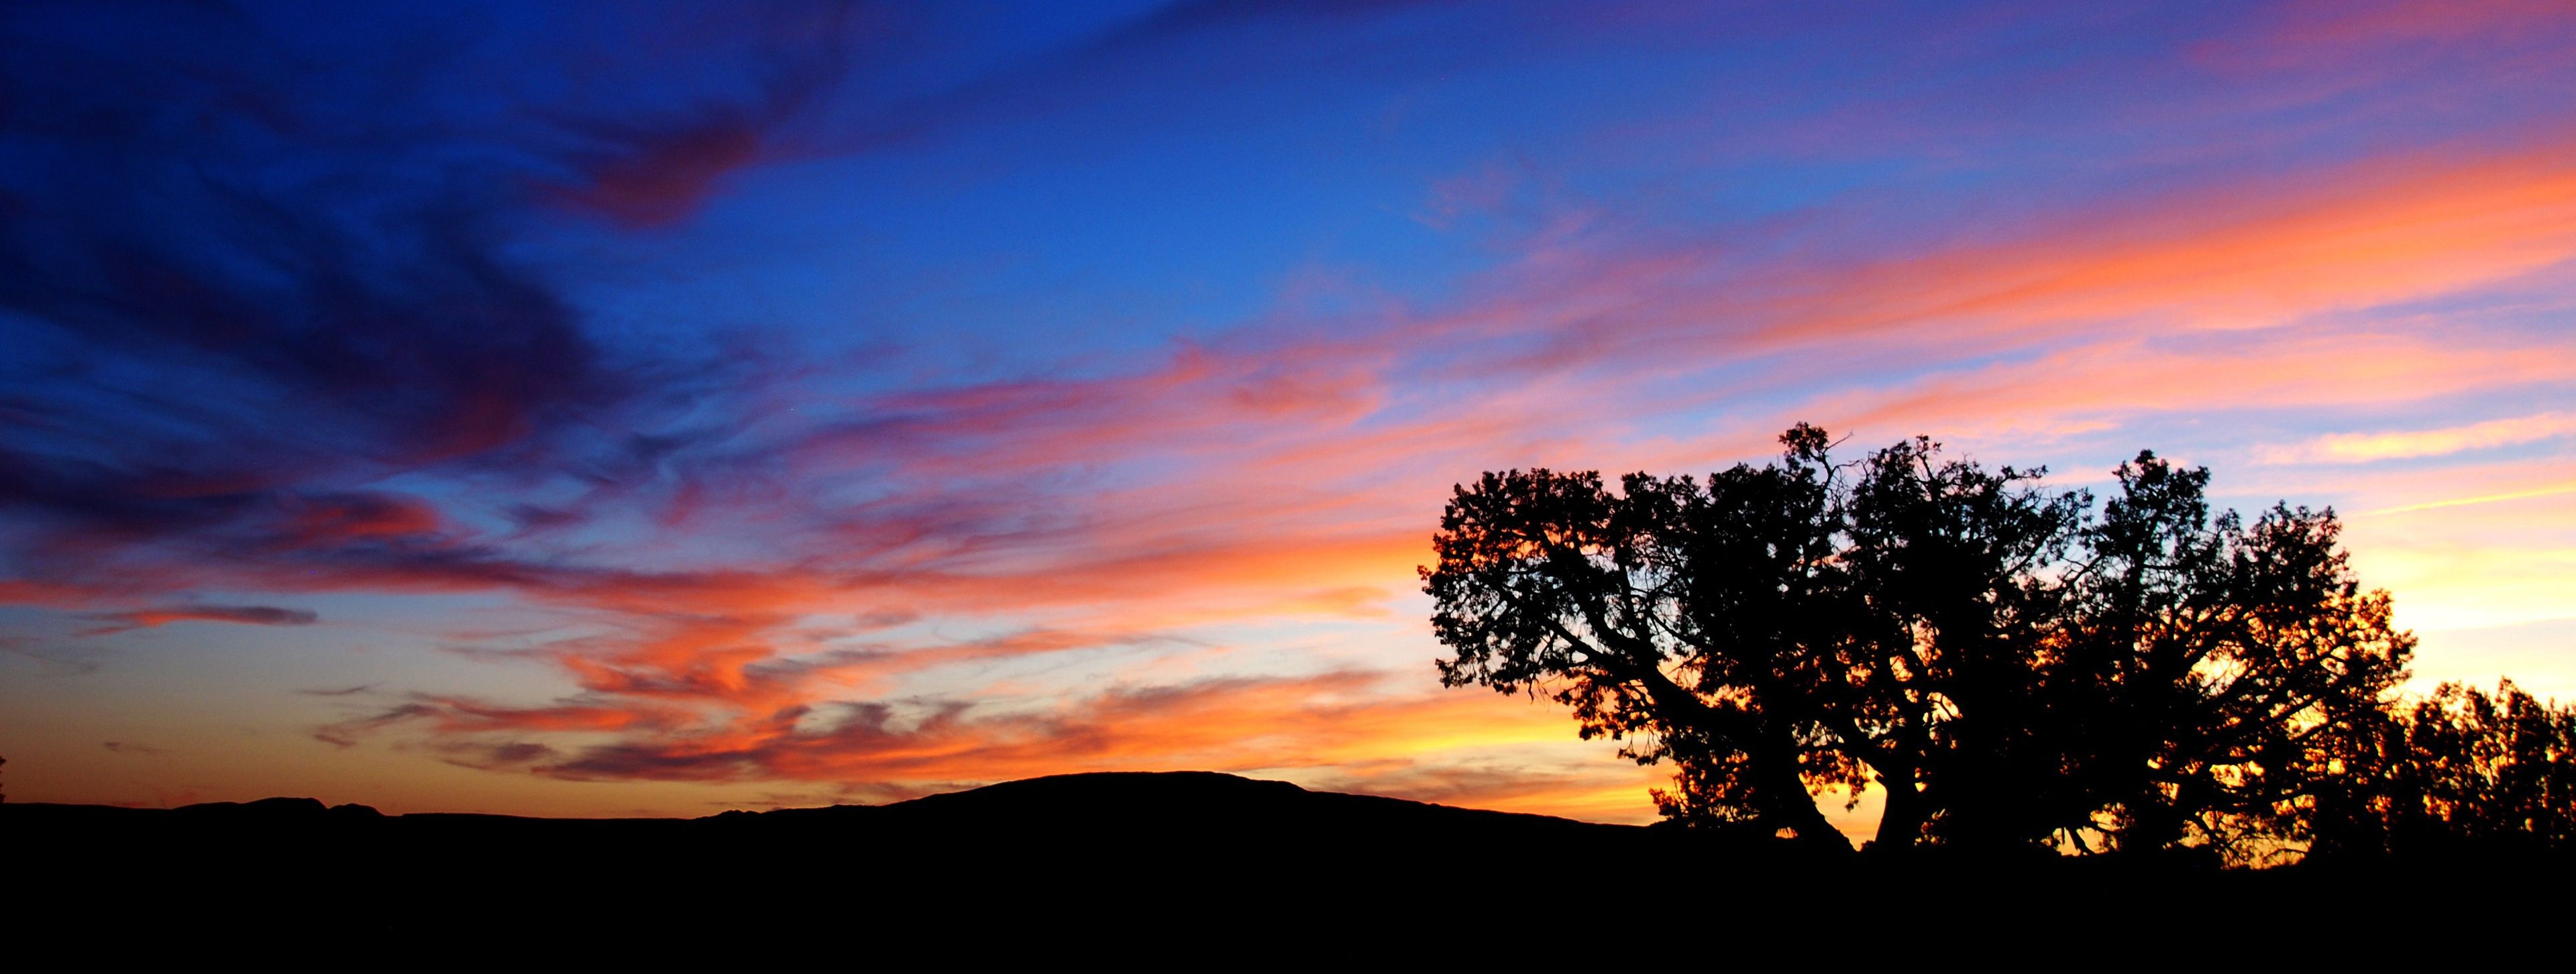 A large tree is silhouetted by a sunset.